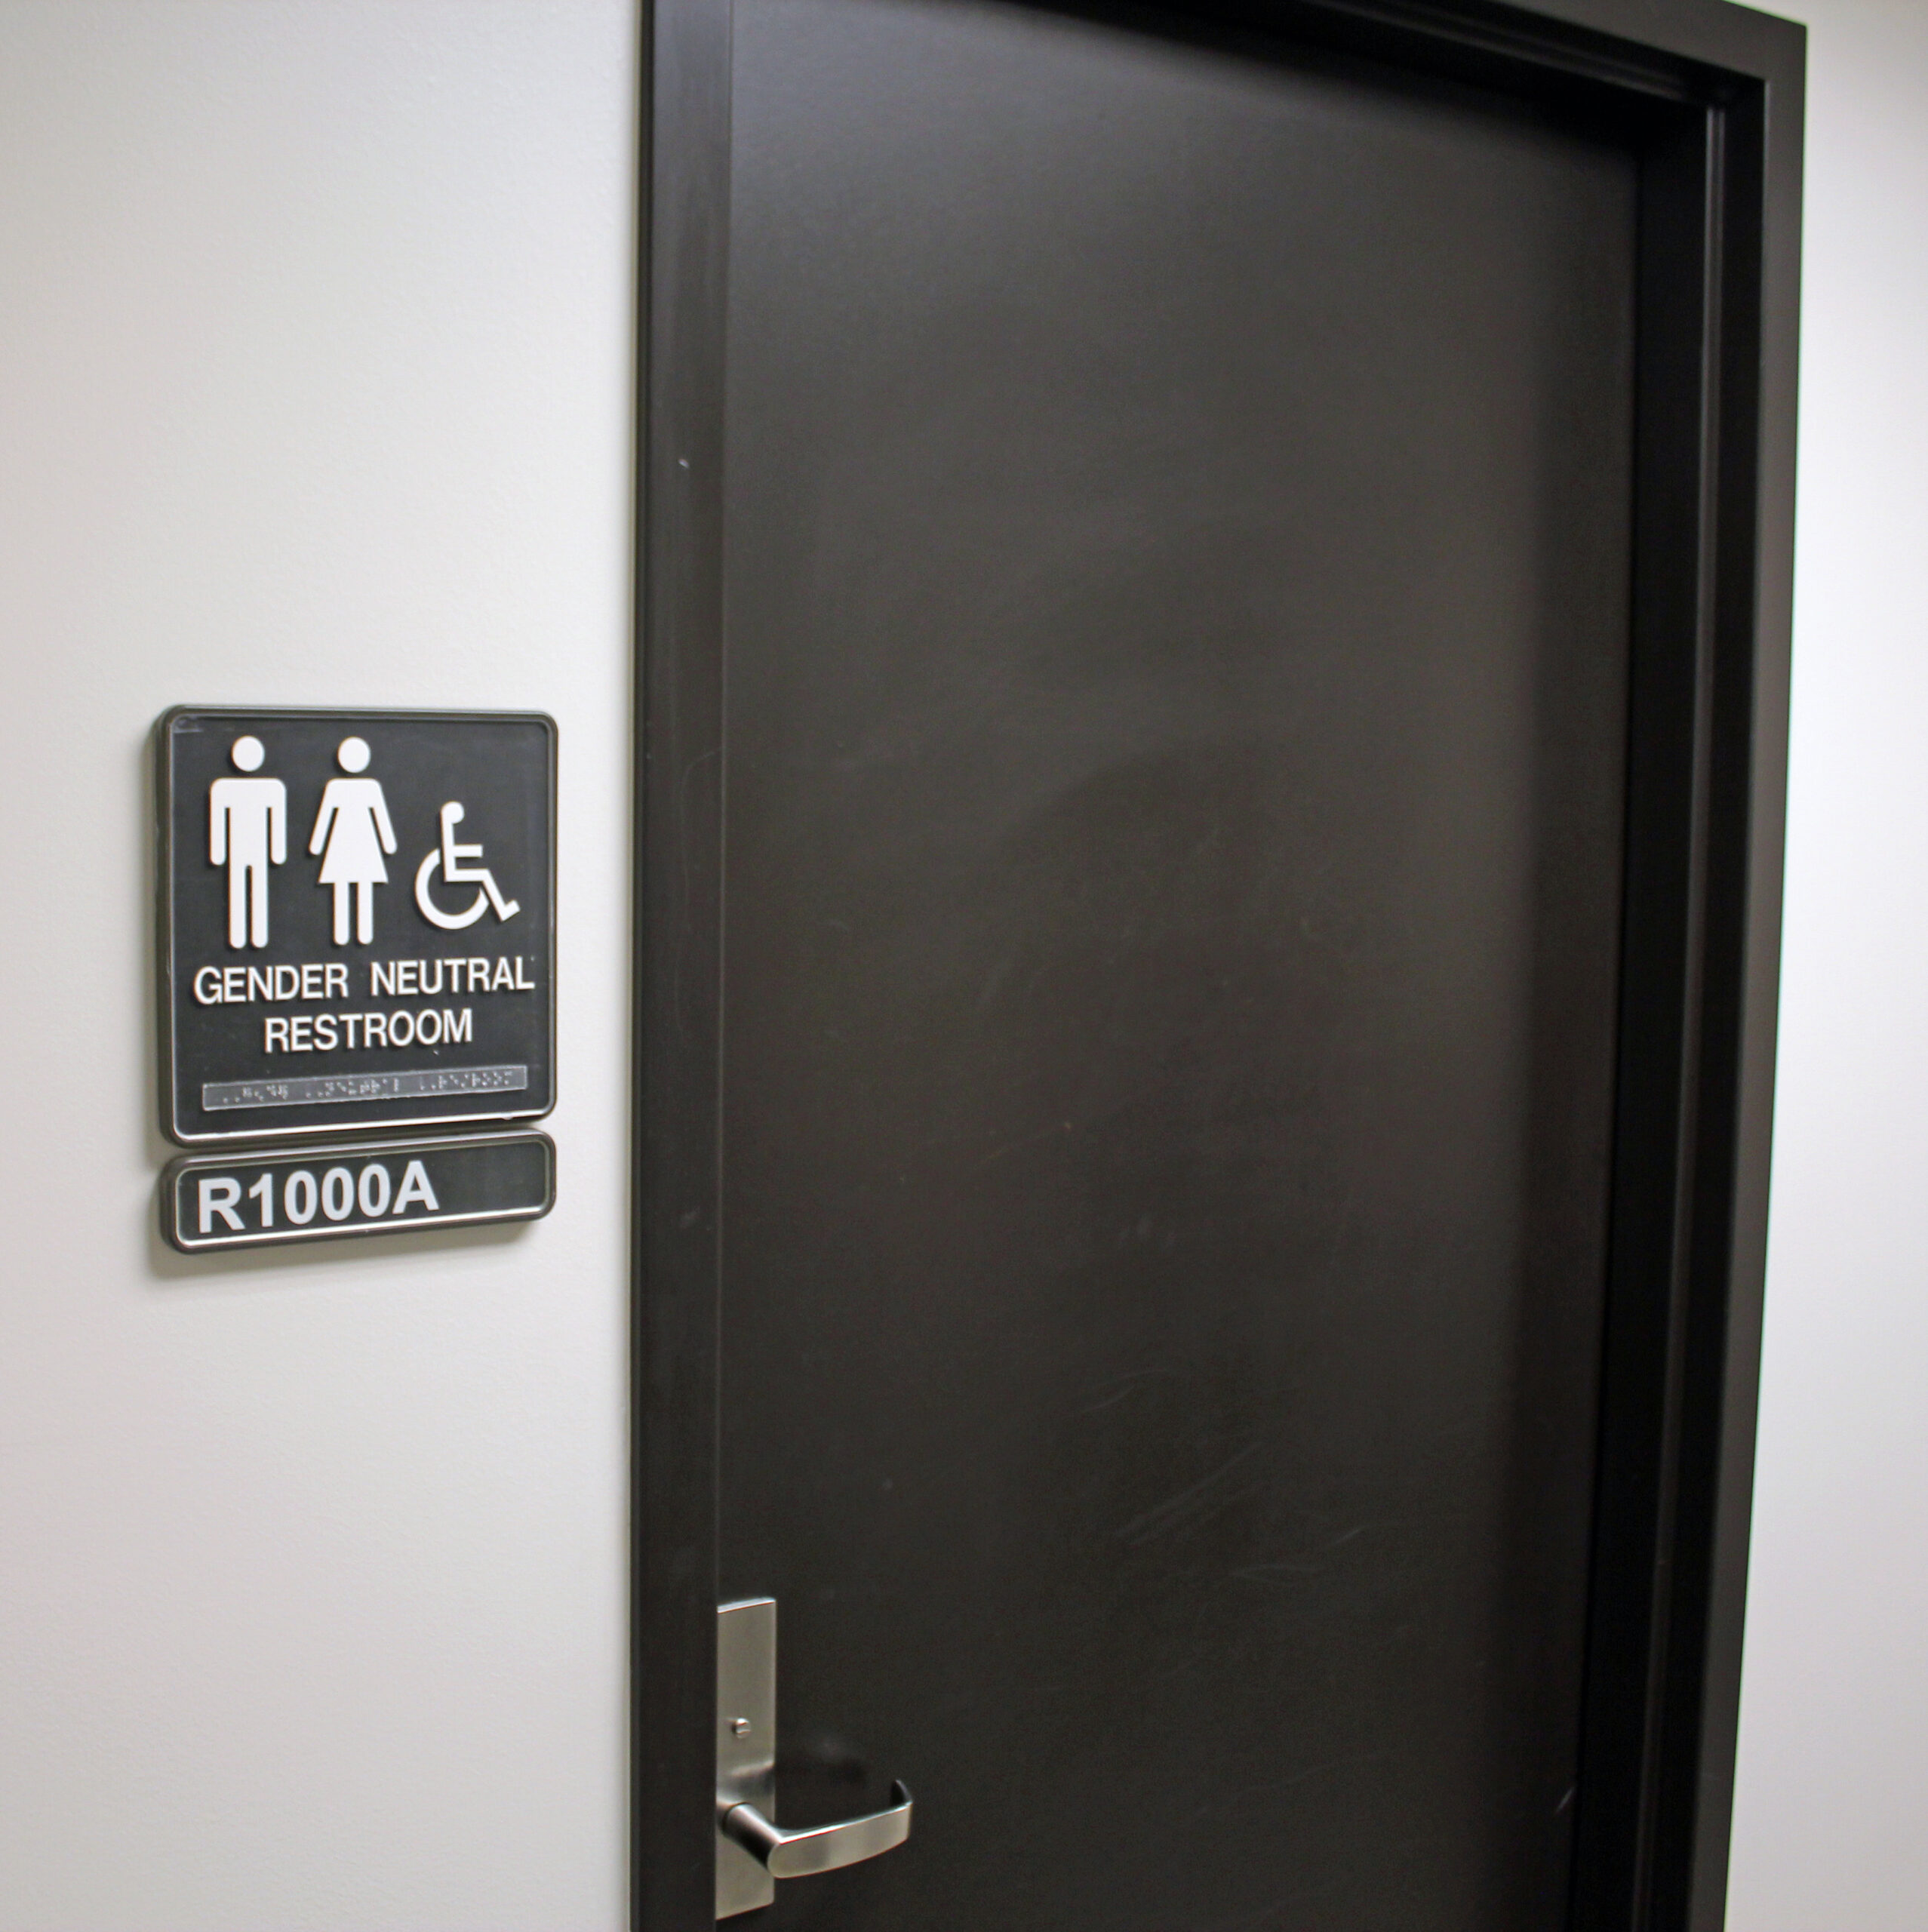 Following push from the LGBT community and the UC Office of the President, on July 7, Associated Students UCLA will begin construction on the first gender-neutral restroom in Ackerman Union. Photo by Jeffrey Beall.